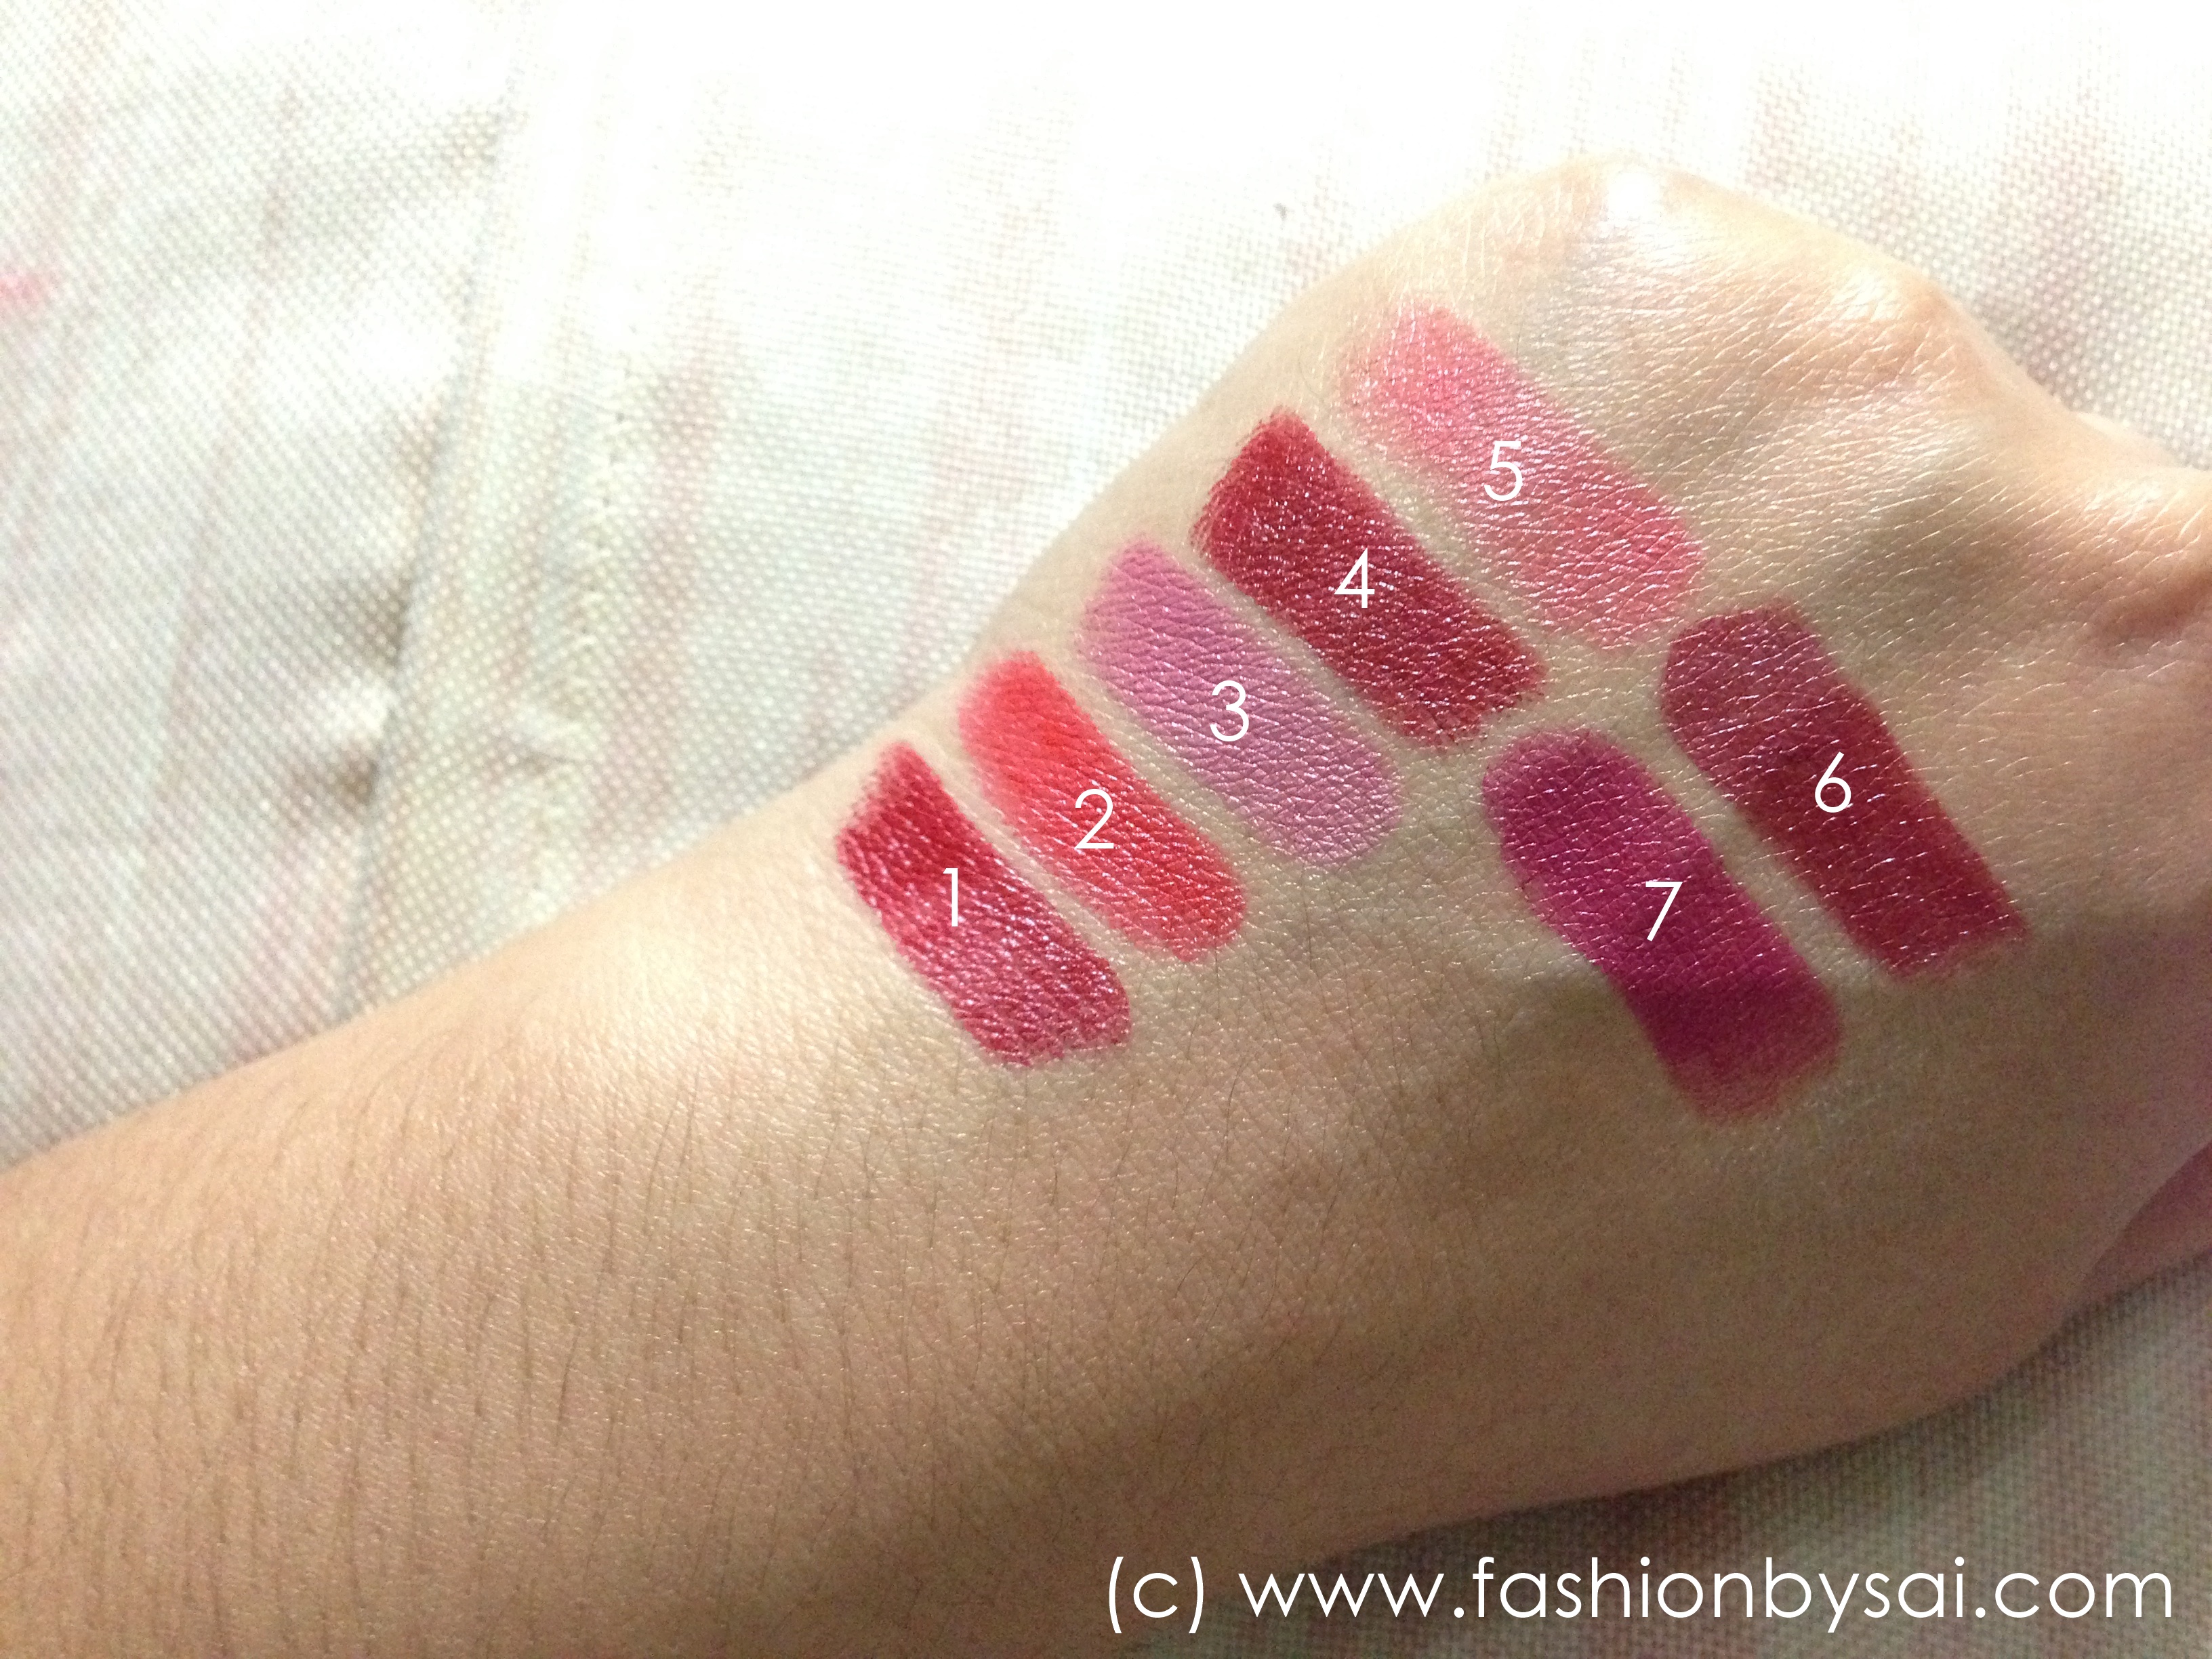 Avon Colorlast Lipstick Review and Swatches by Sai Montes beauty blogger fashionbysai